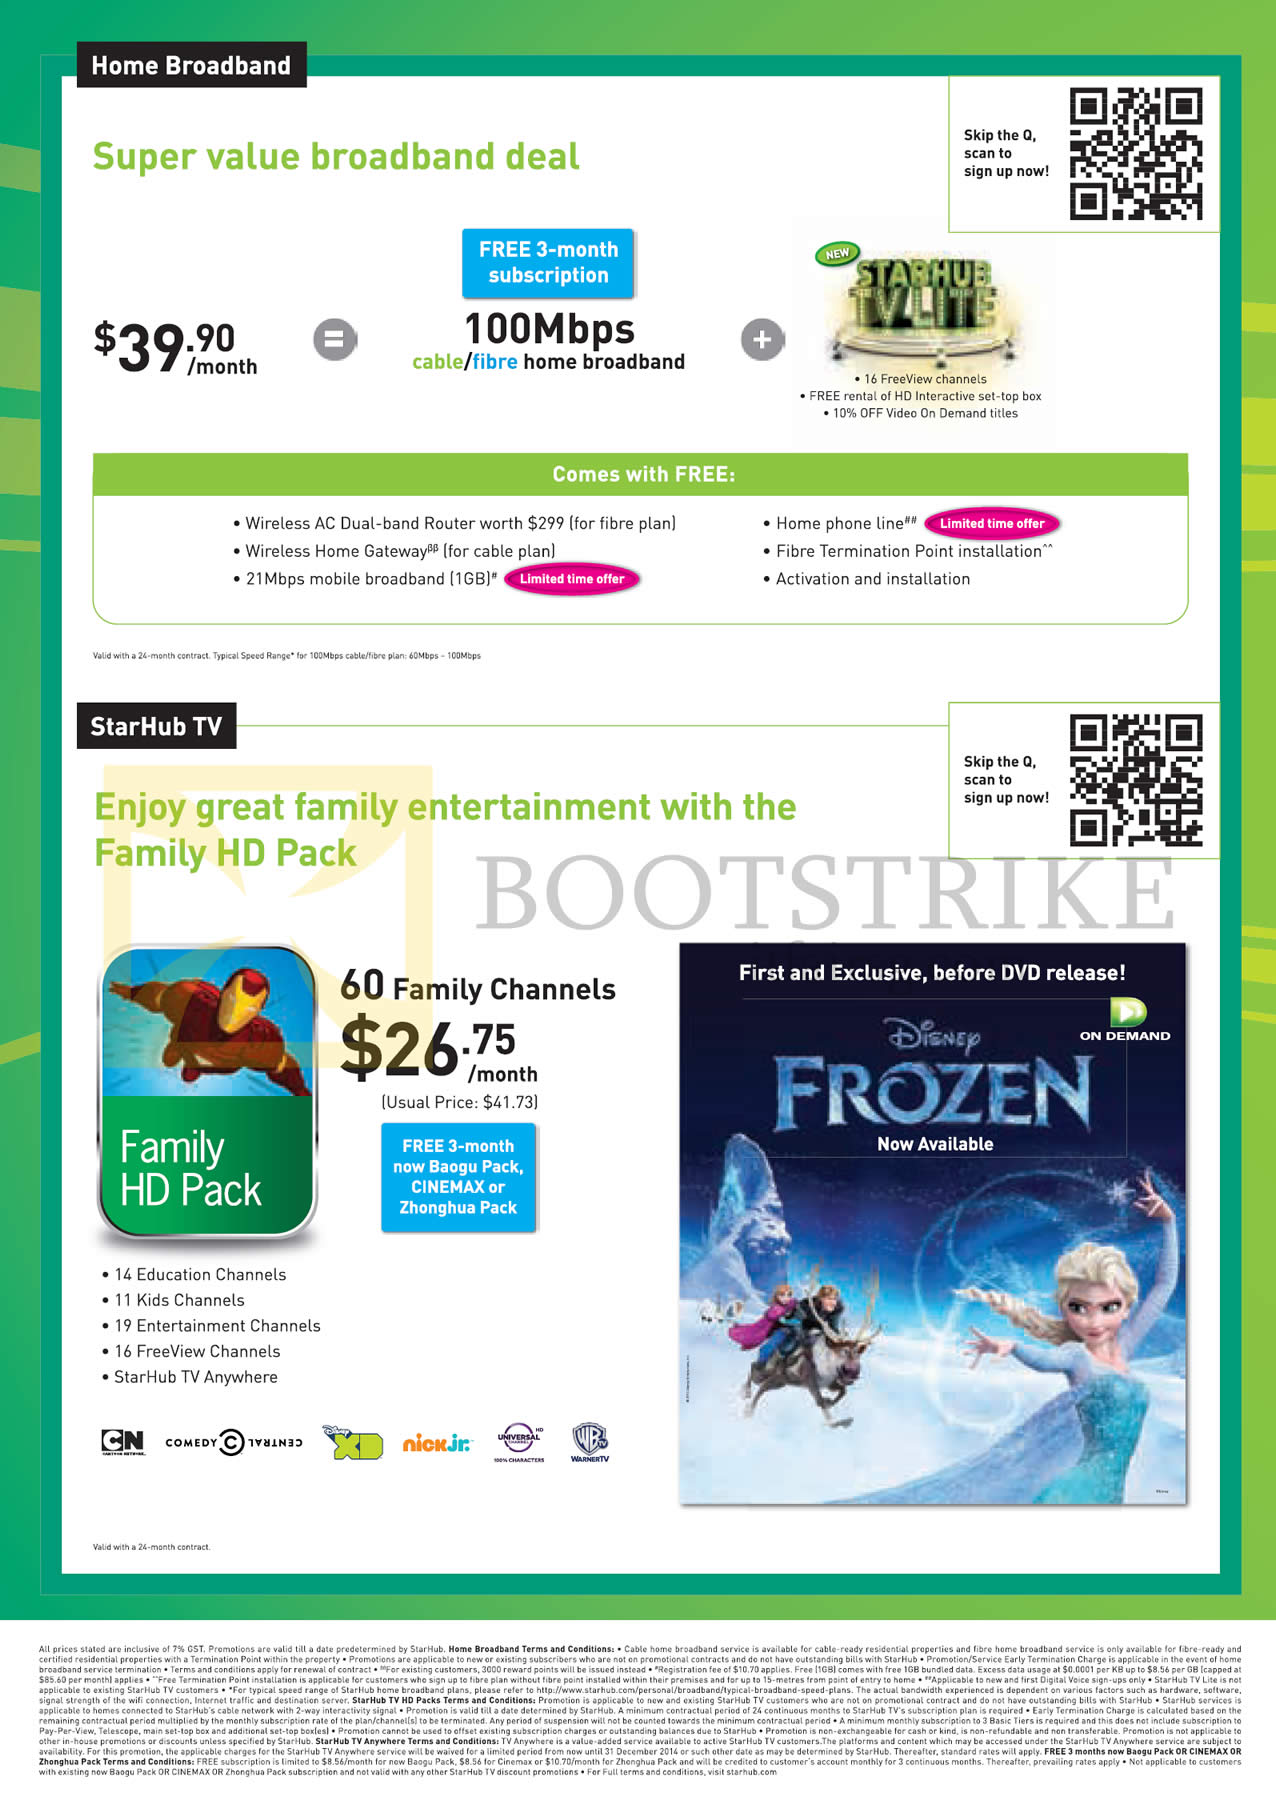 IT SHOW 2014 price list image brochure of Starhub Broadband Fibre Cable 100Mbps 39.90 Free 3 Month, Cable TV Family HD Pack